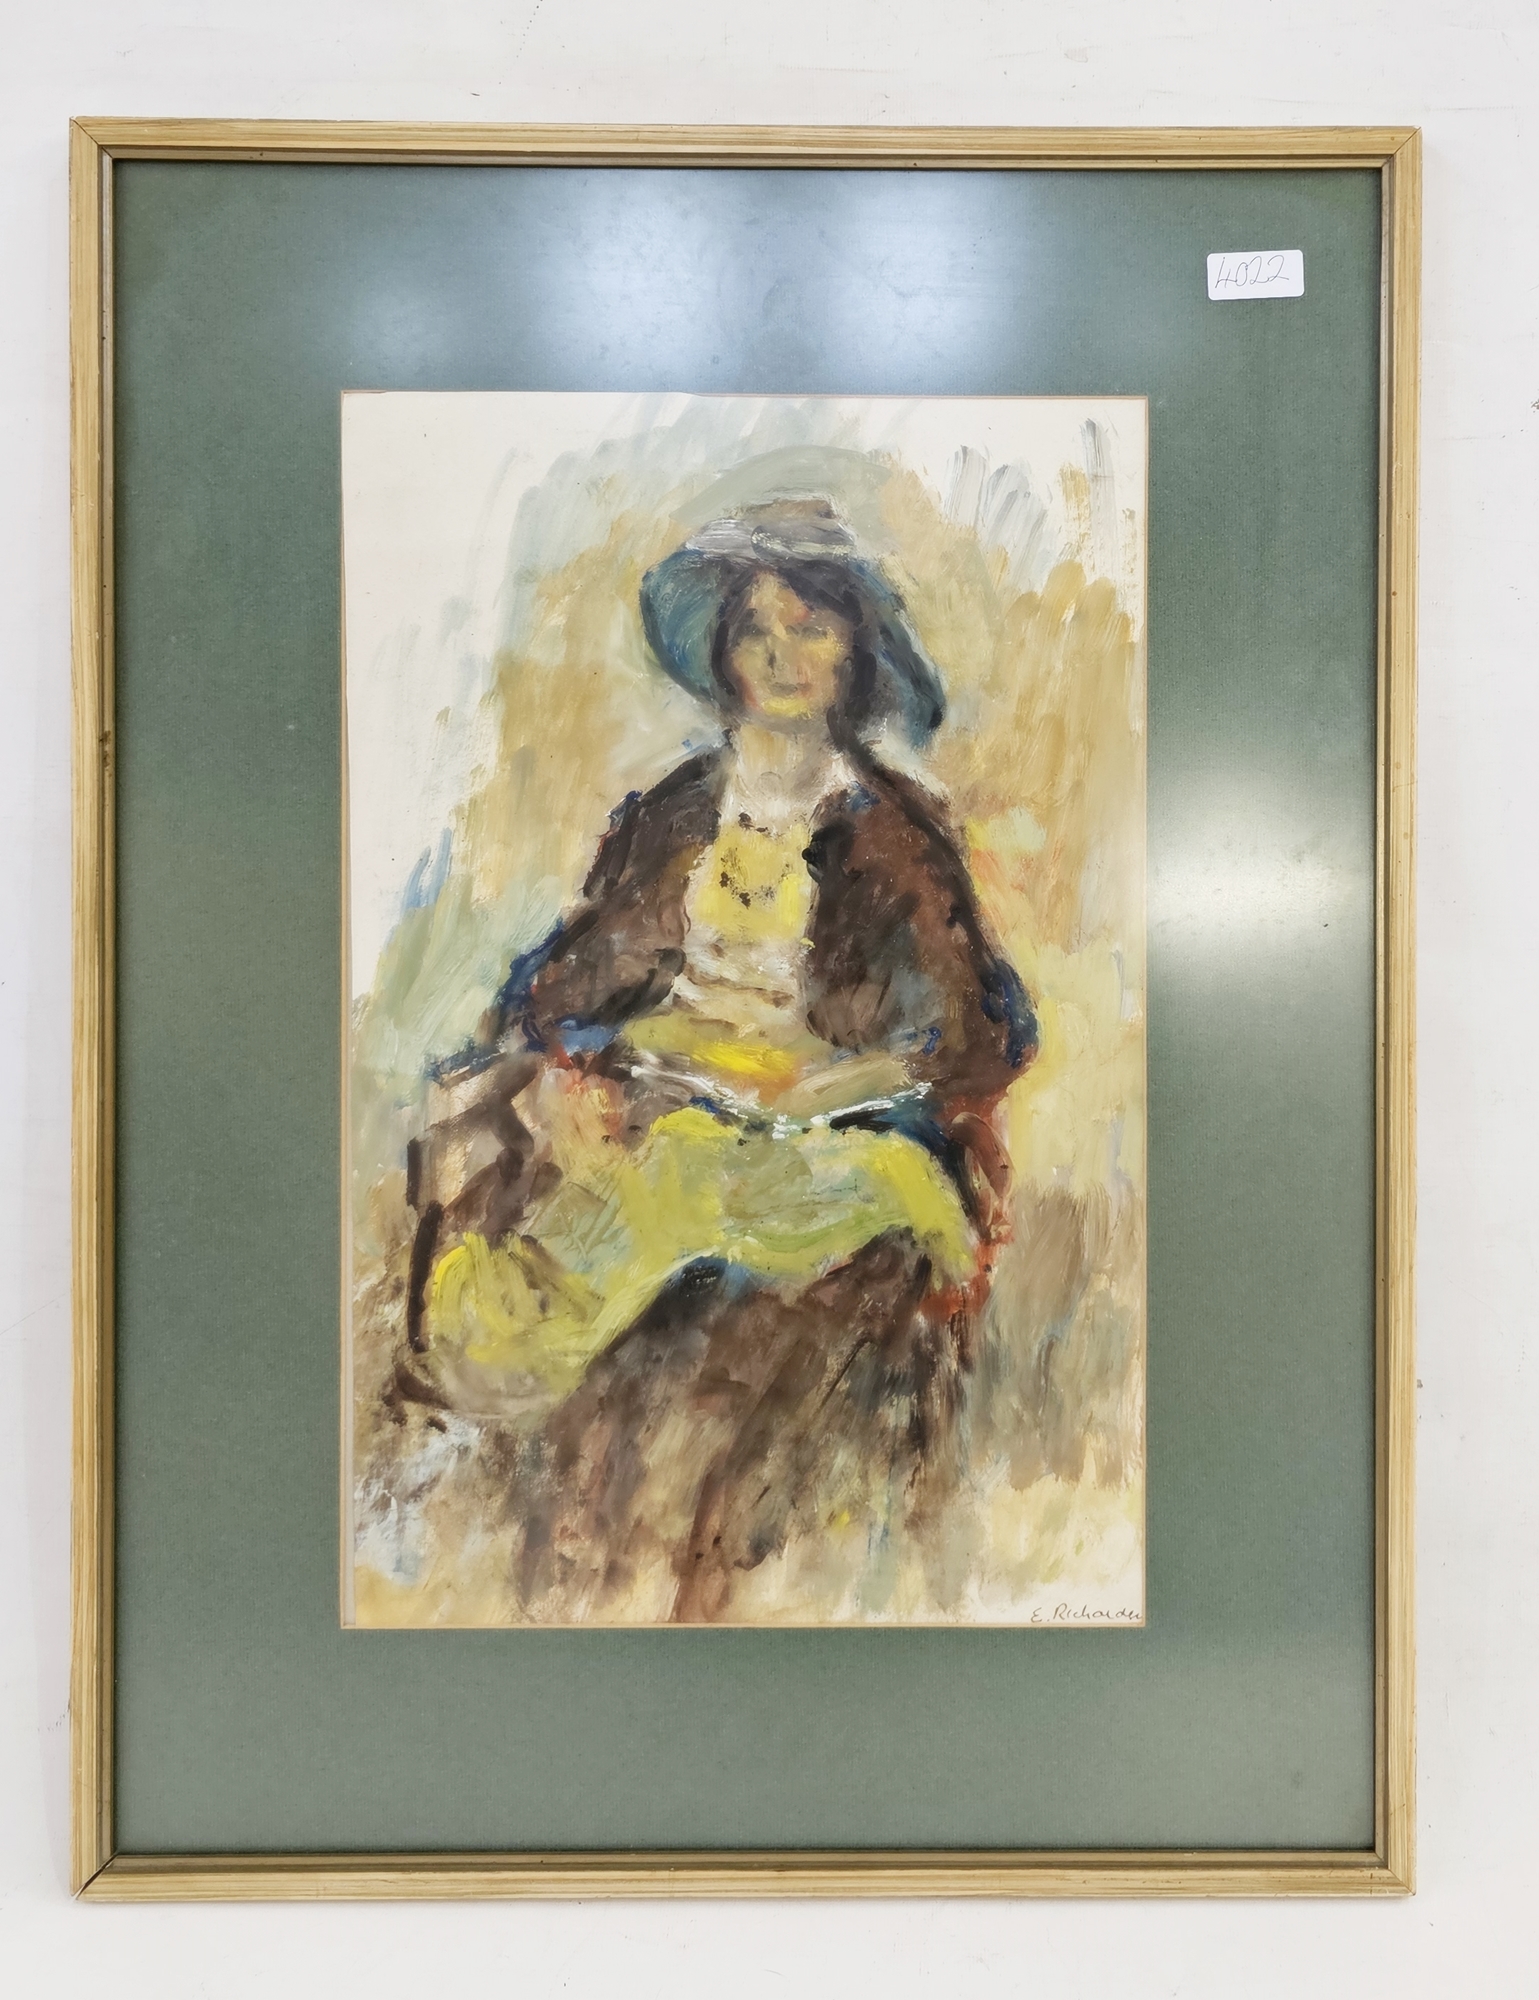 E. Richardson (20th century) Oil on paper Portrait of a seated lady, signed lower right, framed - Image 2 of 3